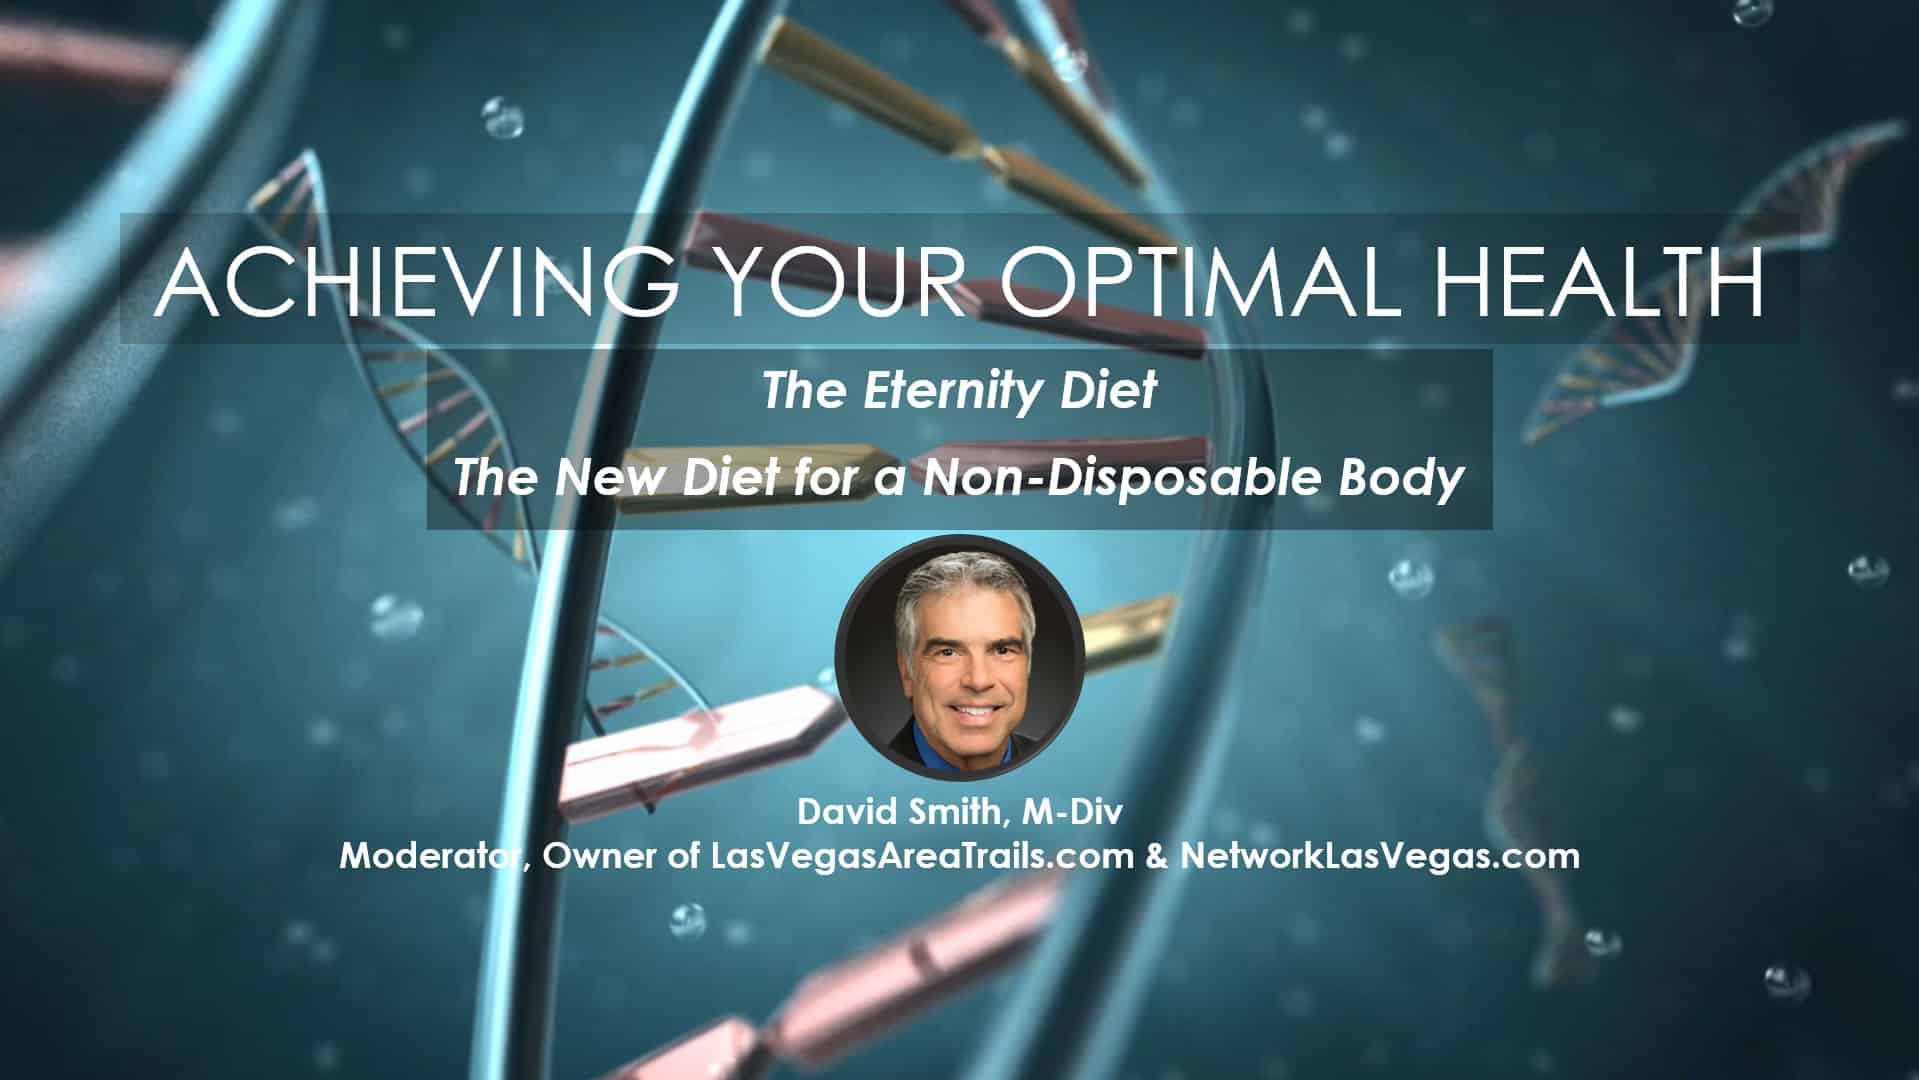 The Eternity Diet, Webinar Presented by David Smith in Achieving Your Optimal Health Series